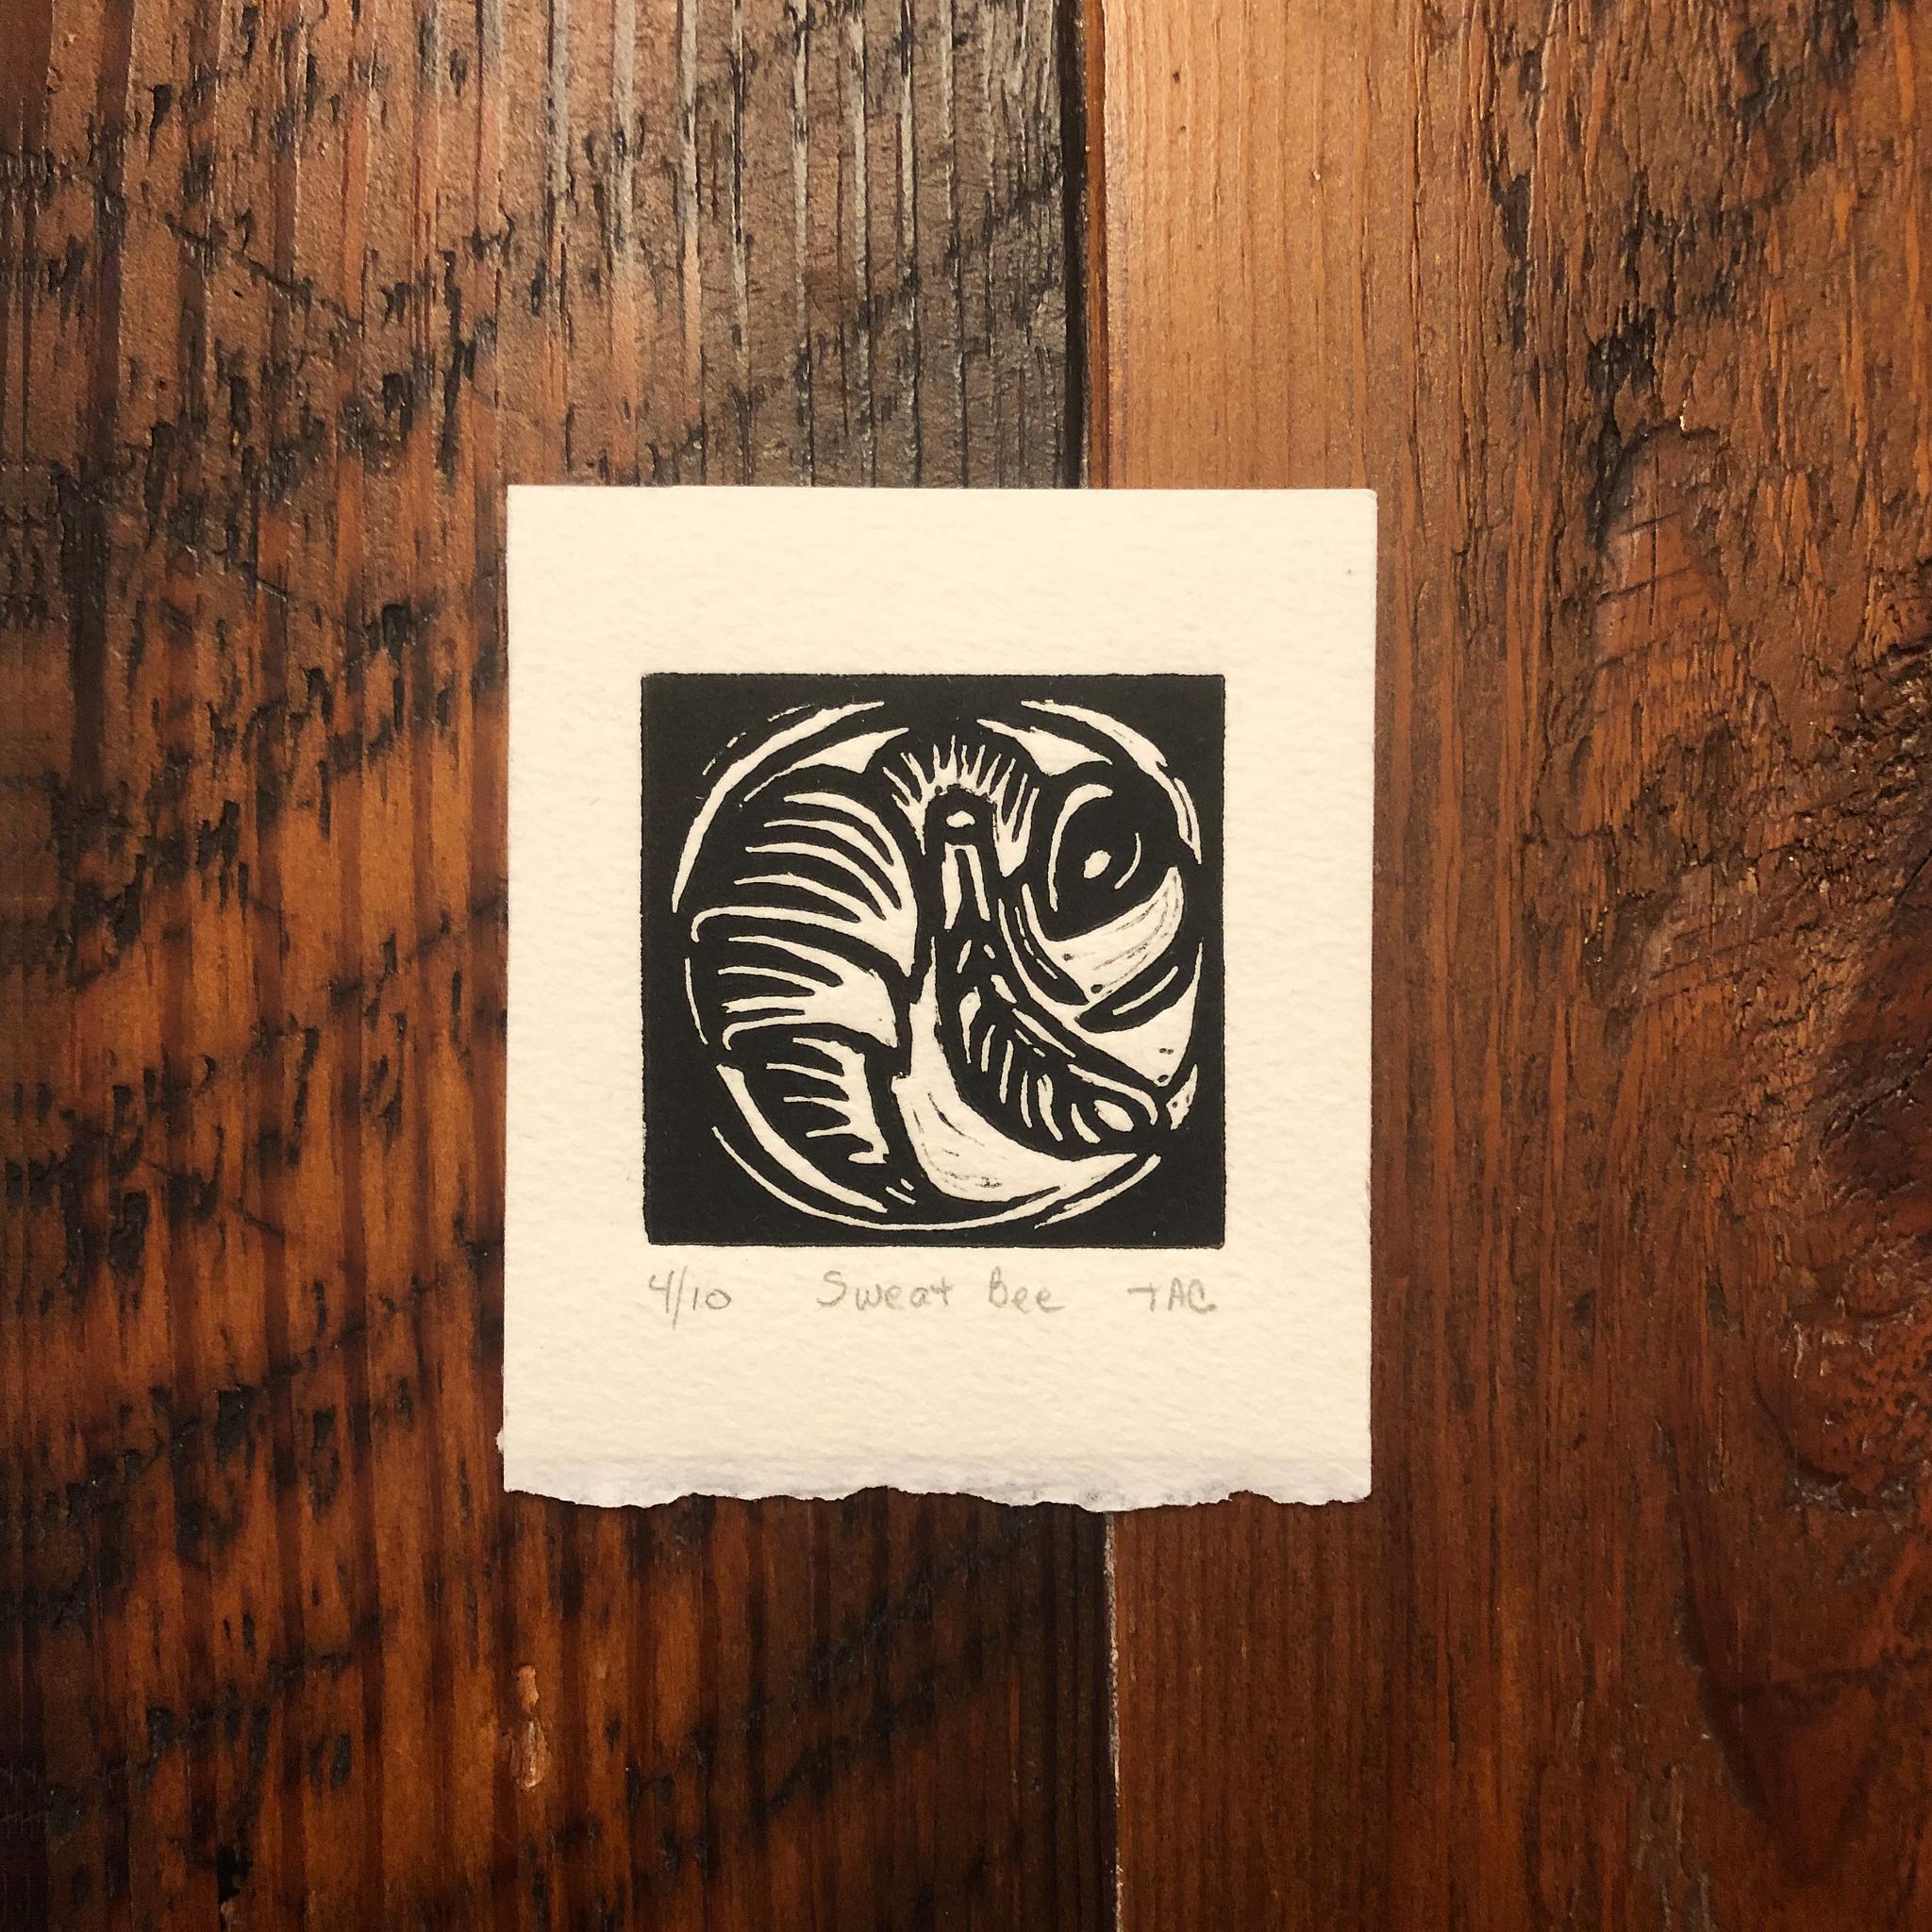 Sweat Bee Mini Linoleum Print - Stay tuned for a second edition.